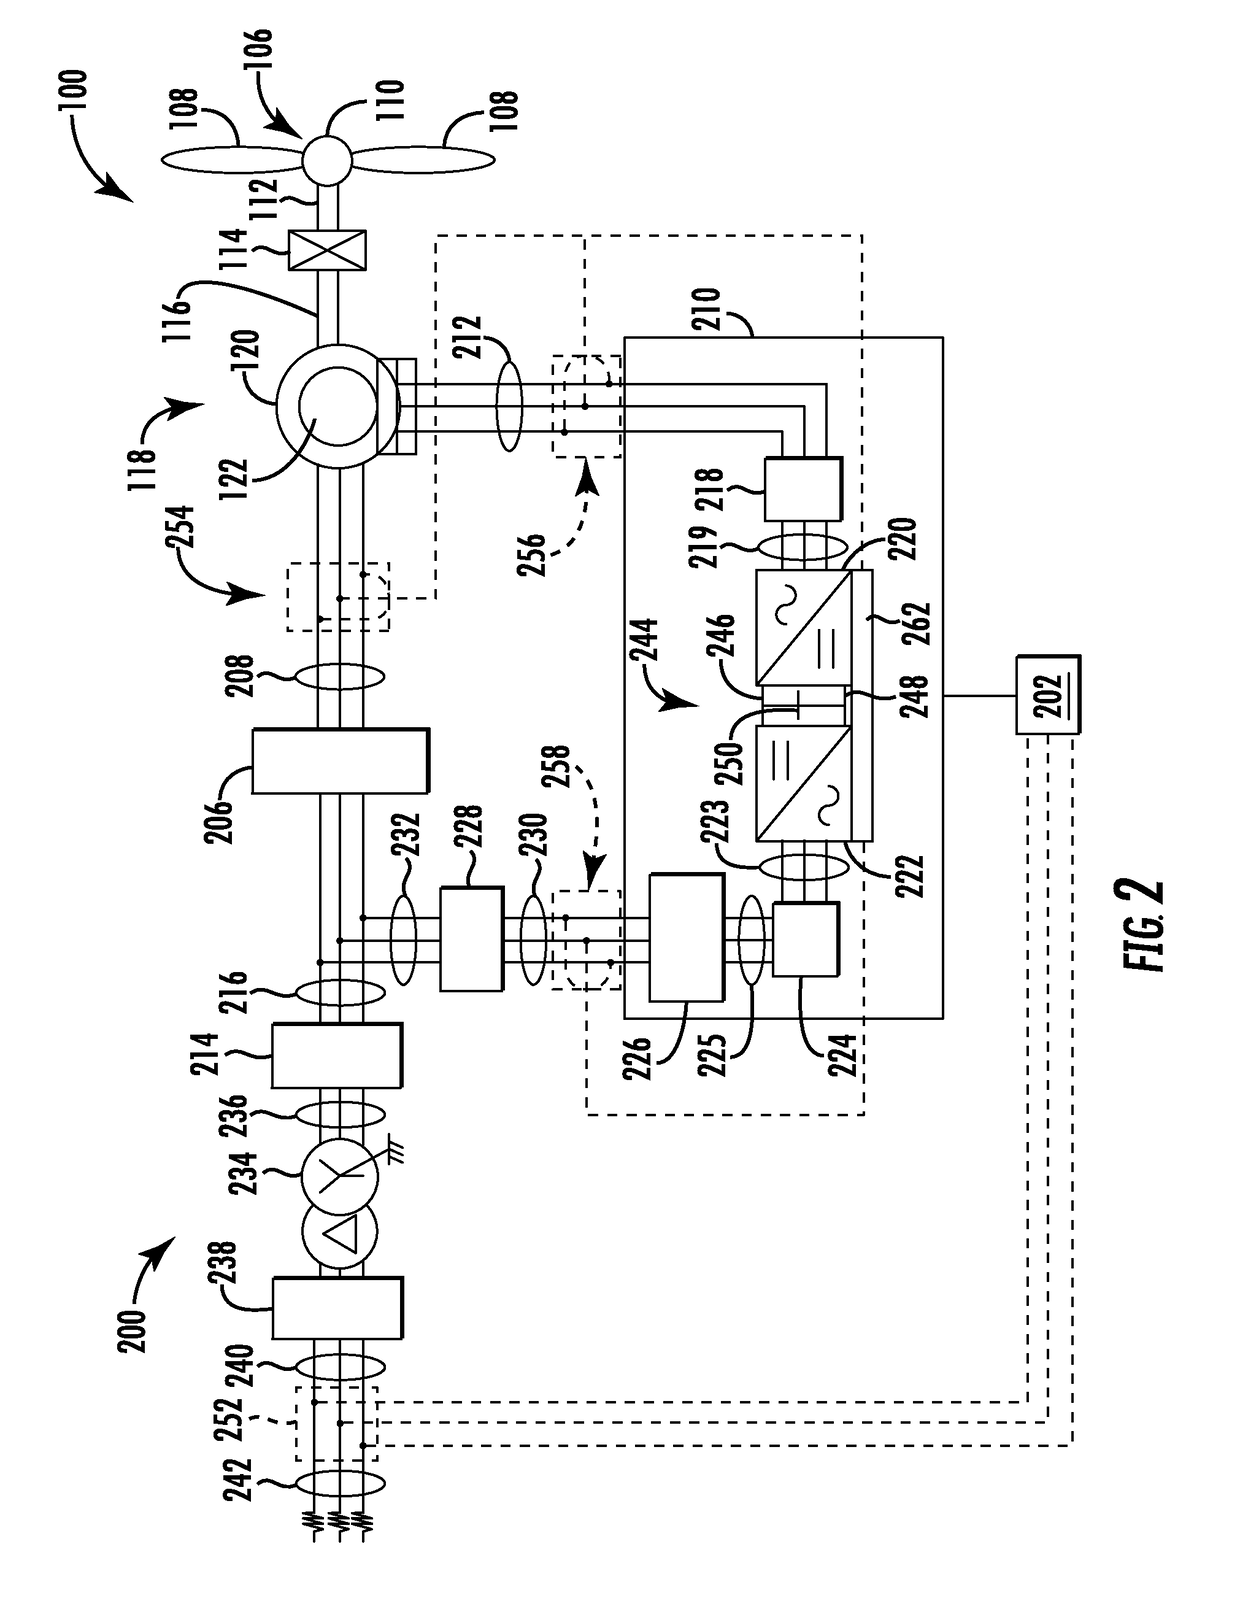 System and method for preventing voltage collapse of wind turbine power systems connected to a power grid